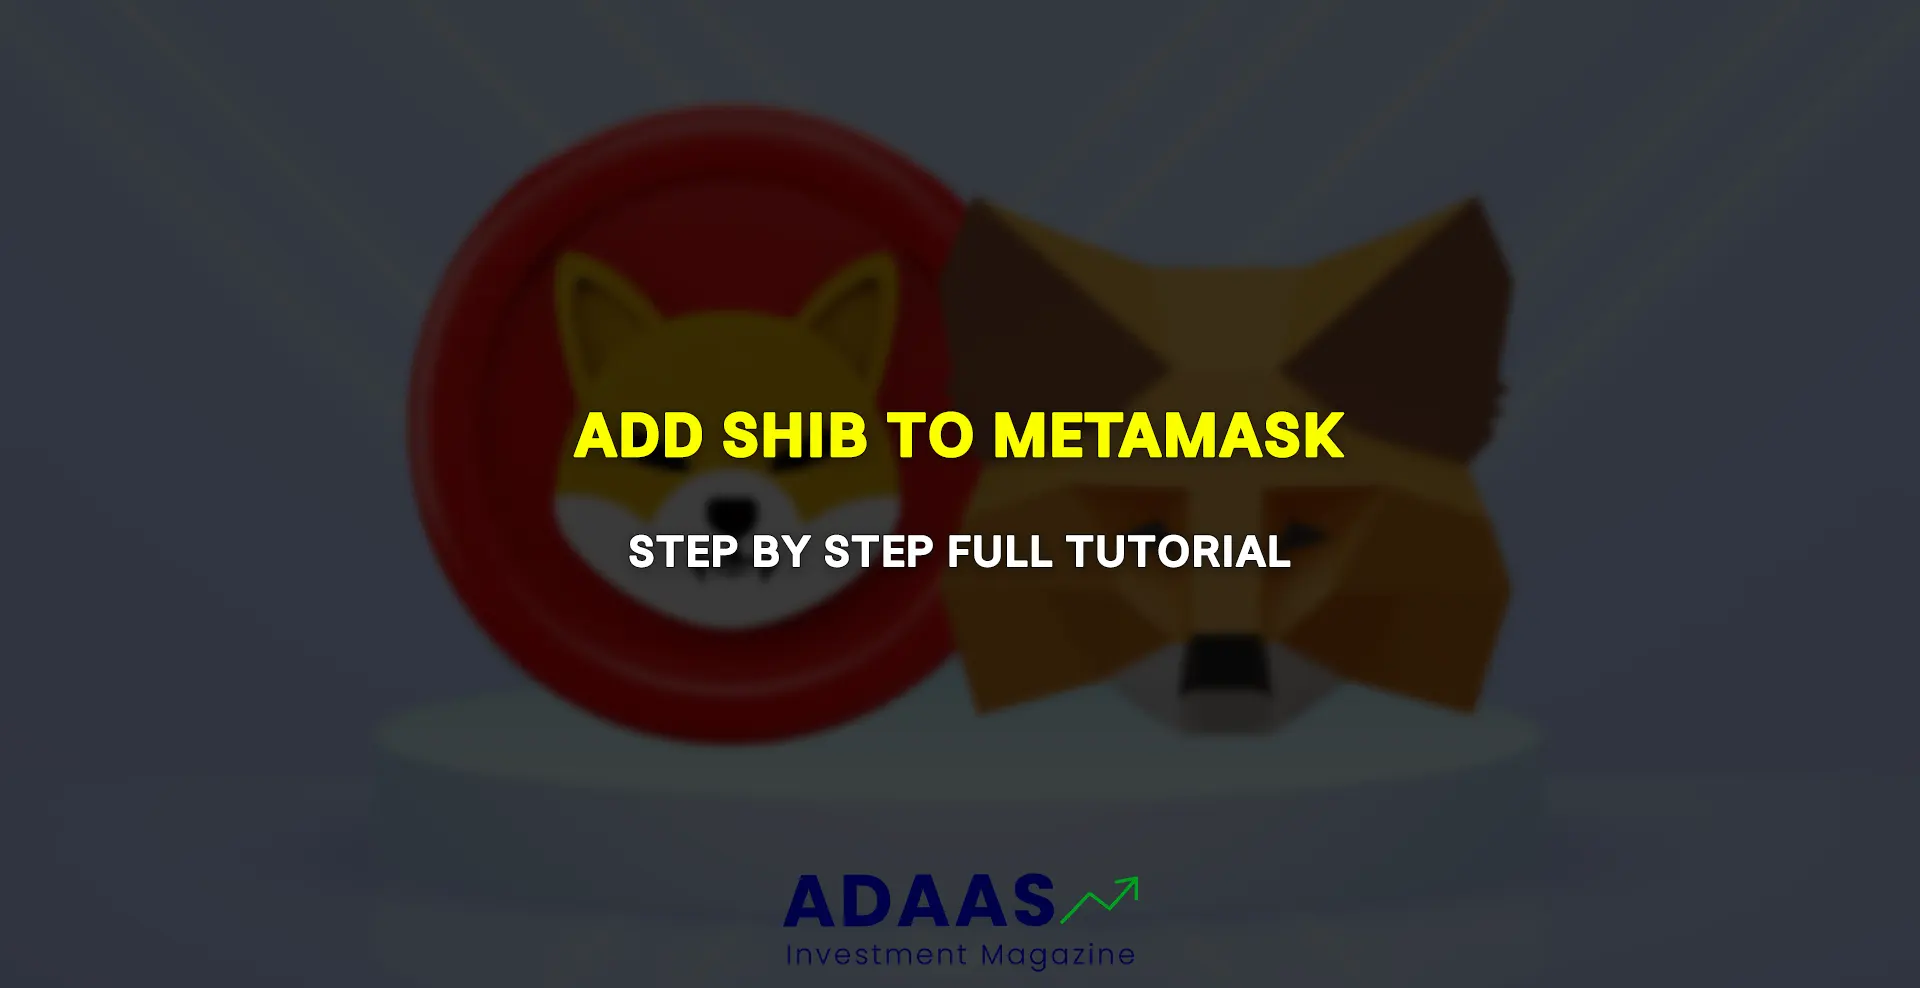 Step 2: Search for Metamask